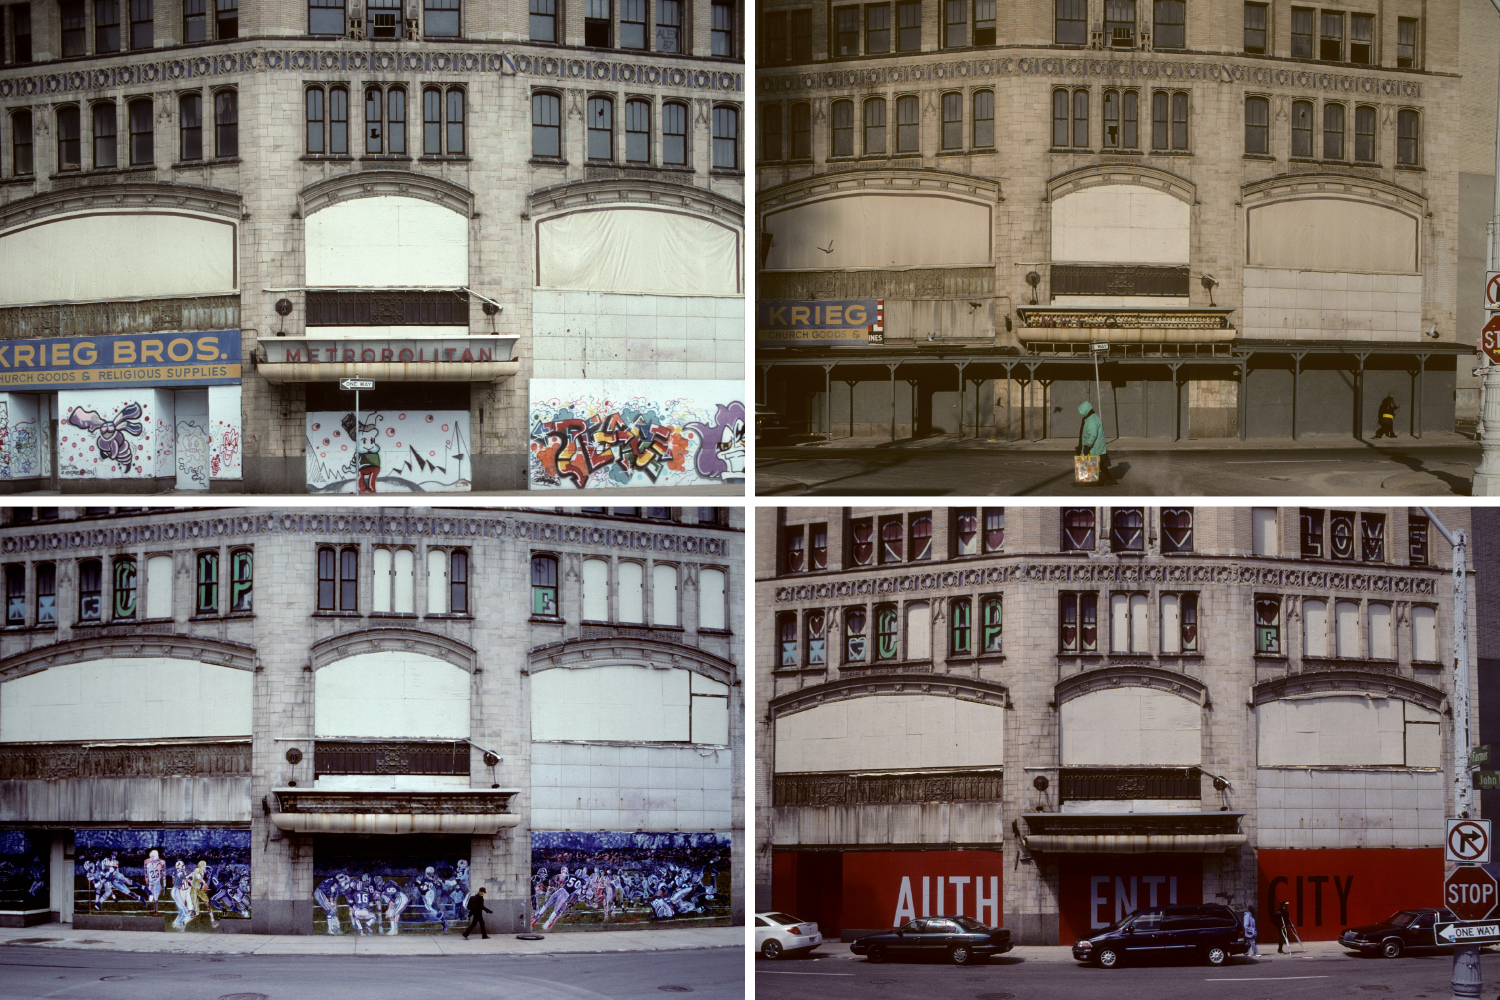 From top left: With traces of its former business, Metropolitan Building, detail, Farmer at John R. Sts., Detroit, 1993; Building looses its name, graffiti is painted over with grey paint by
                              the city, Metropolitan Building, detail, Farmer at John R. Sts., Detroit, 1998; Mural celebrating the Super Bowl, Metropolitan Building, detail, Farmer at John R. Sts., Detroit, 2006; Mural suggesting that decay gives Detroit an aura of Authenticity, Metropolitan Building, detail, Farmer at John R. Sts., Detroit, 2009.